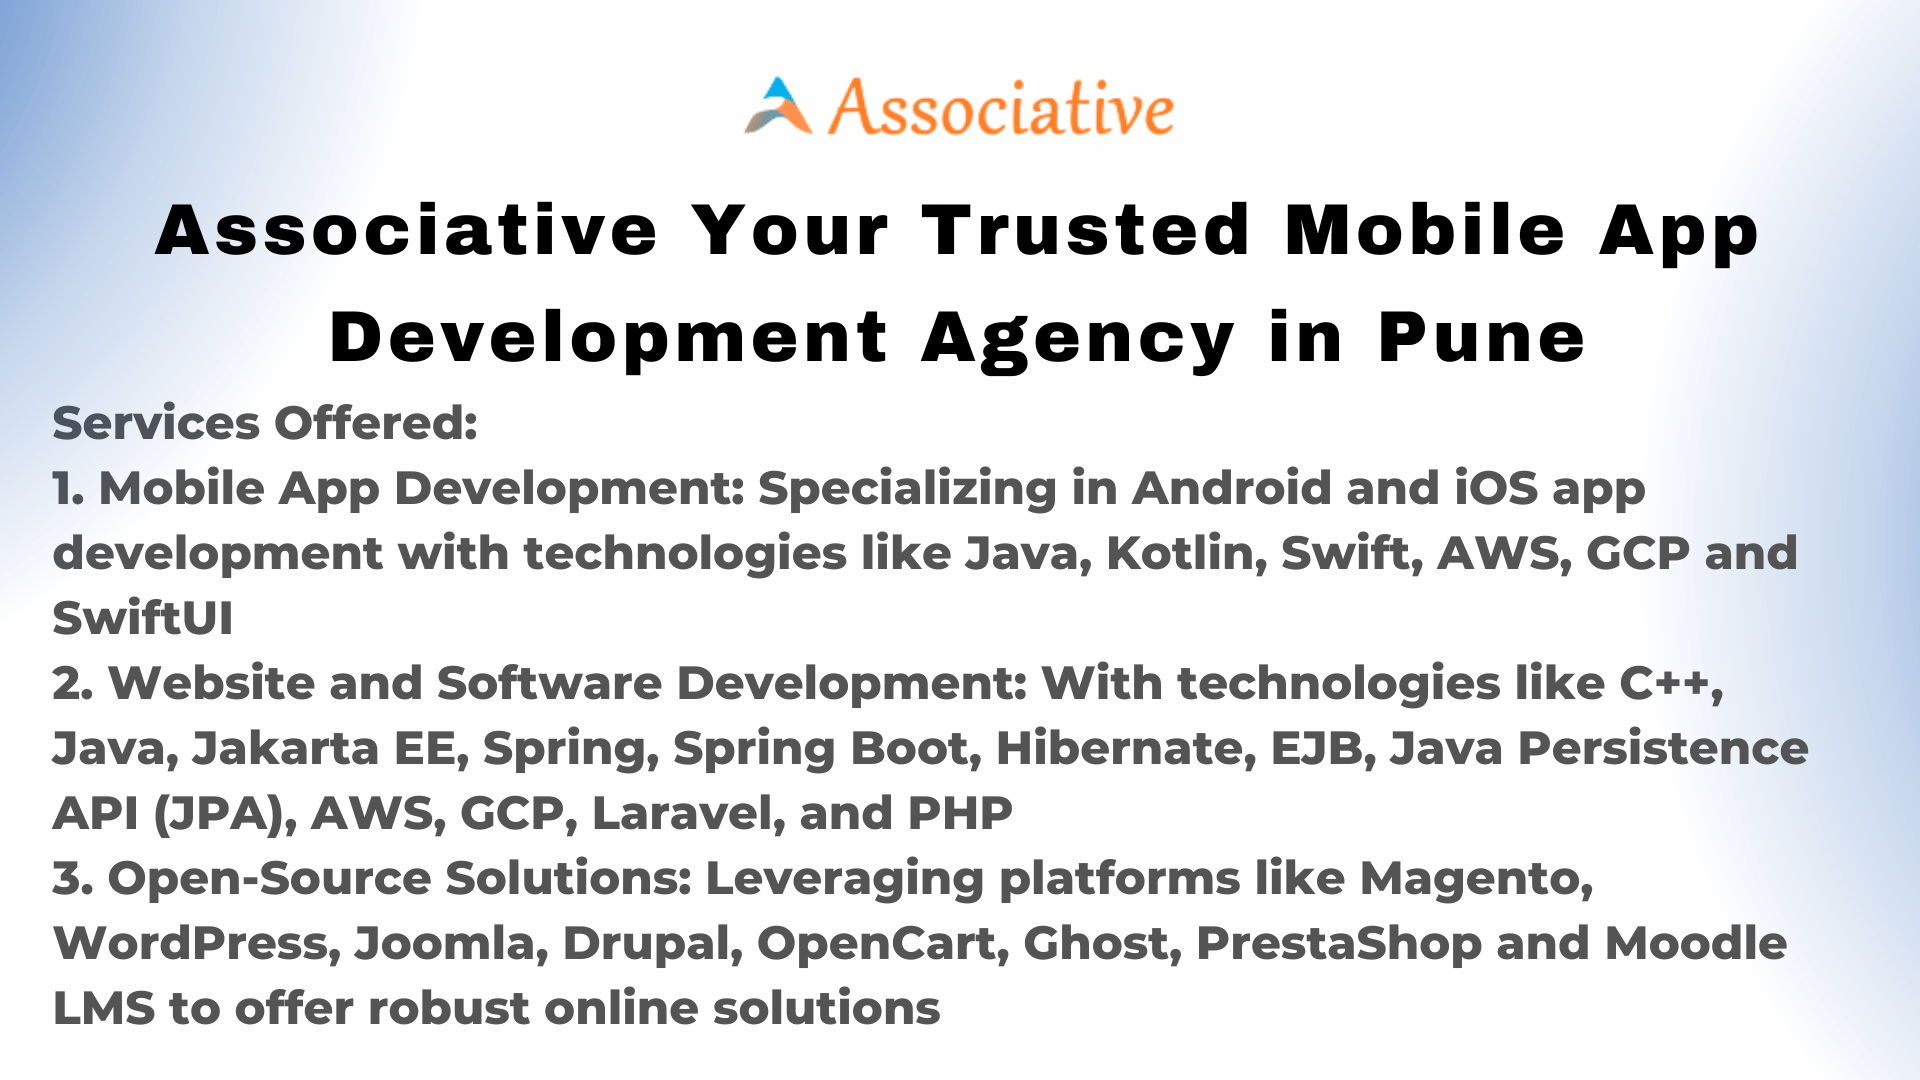 Associative Your Trusted Mobile App Development Agency in Pune